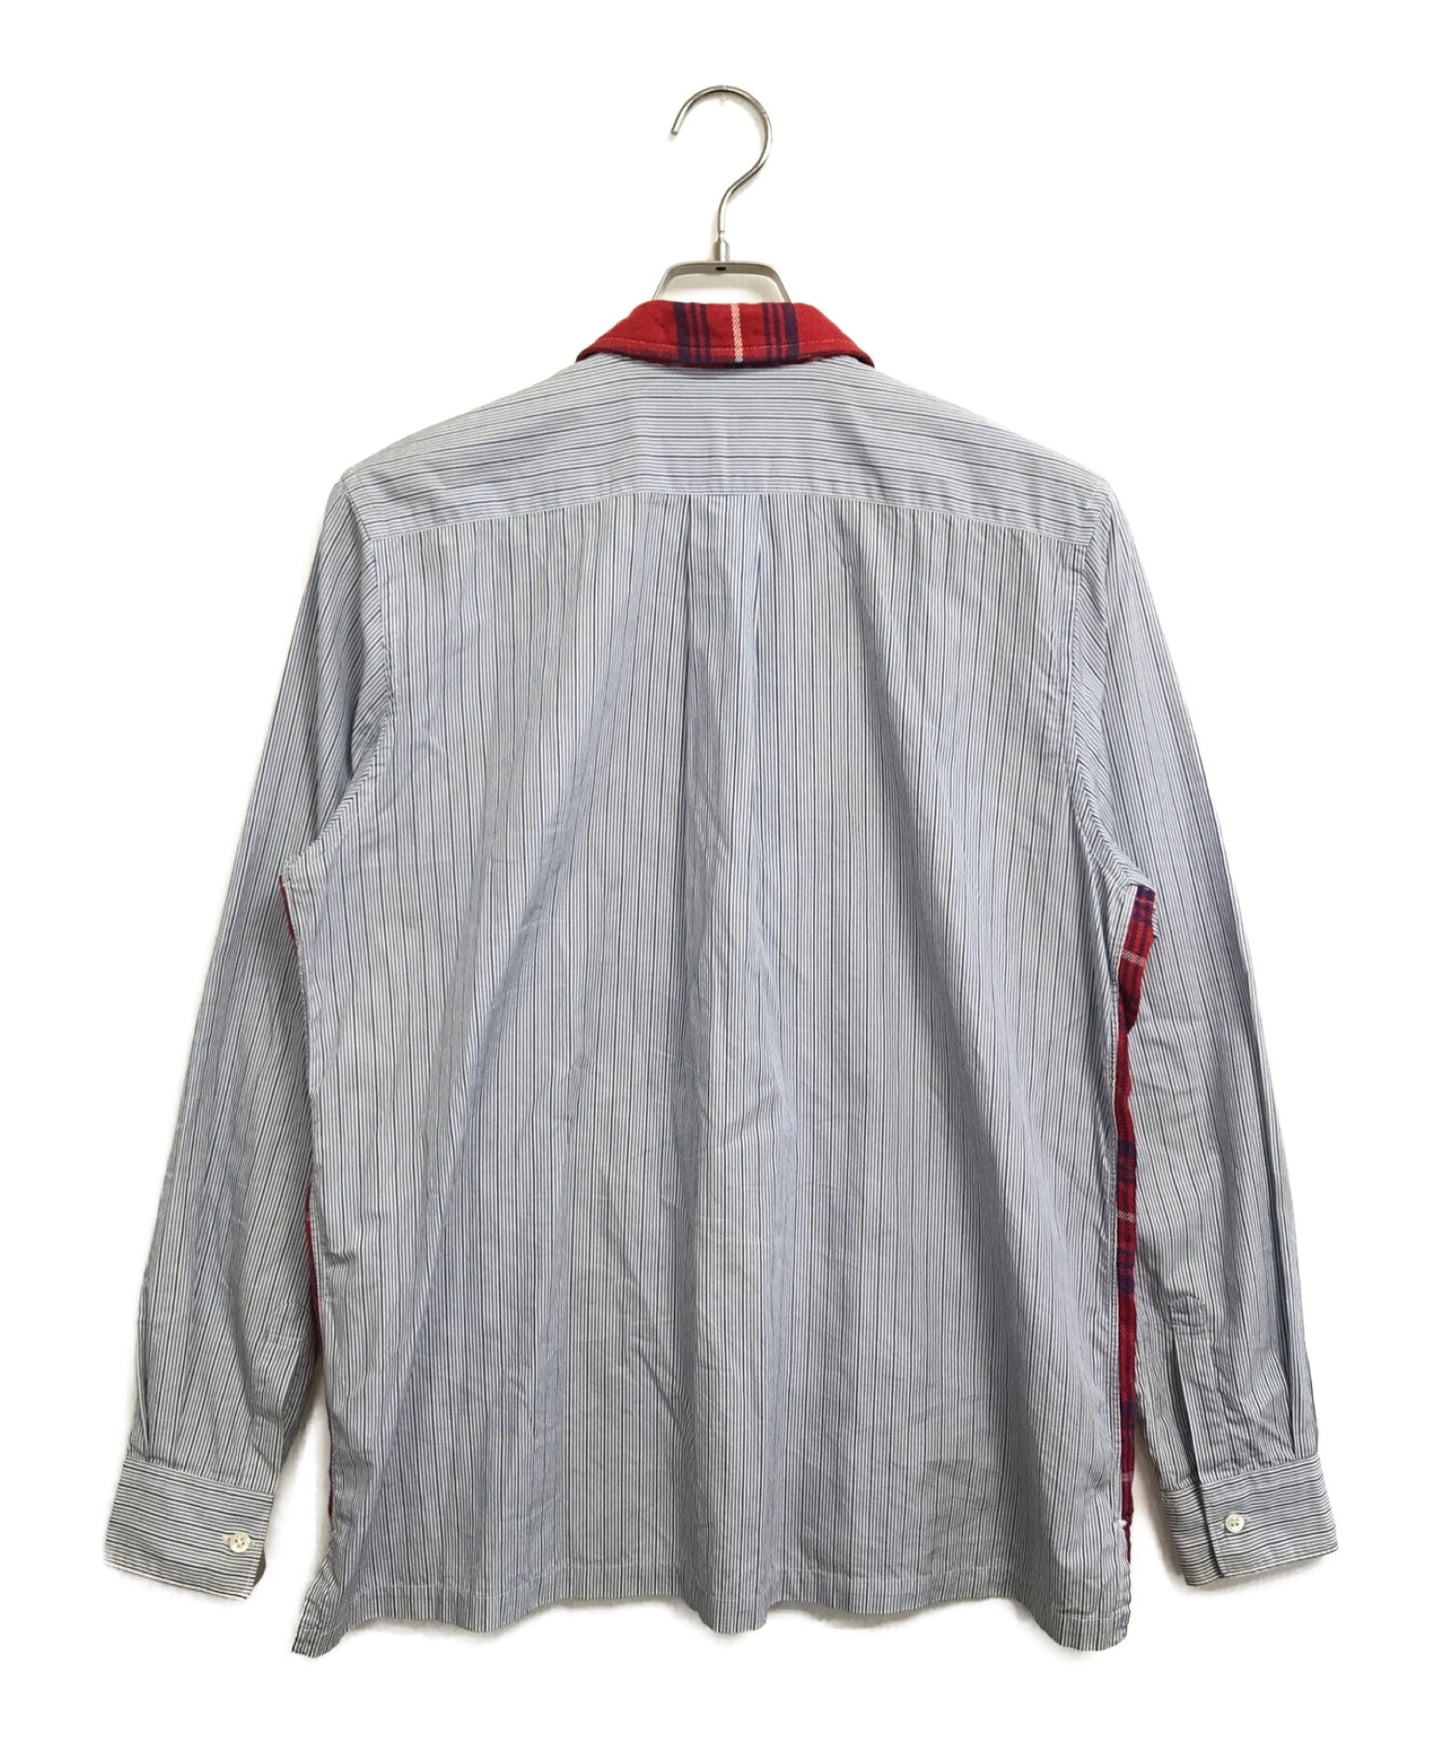 COMME des GARCONS SHIRT 00's Front Checked Striped Shirt Jacket S10162